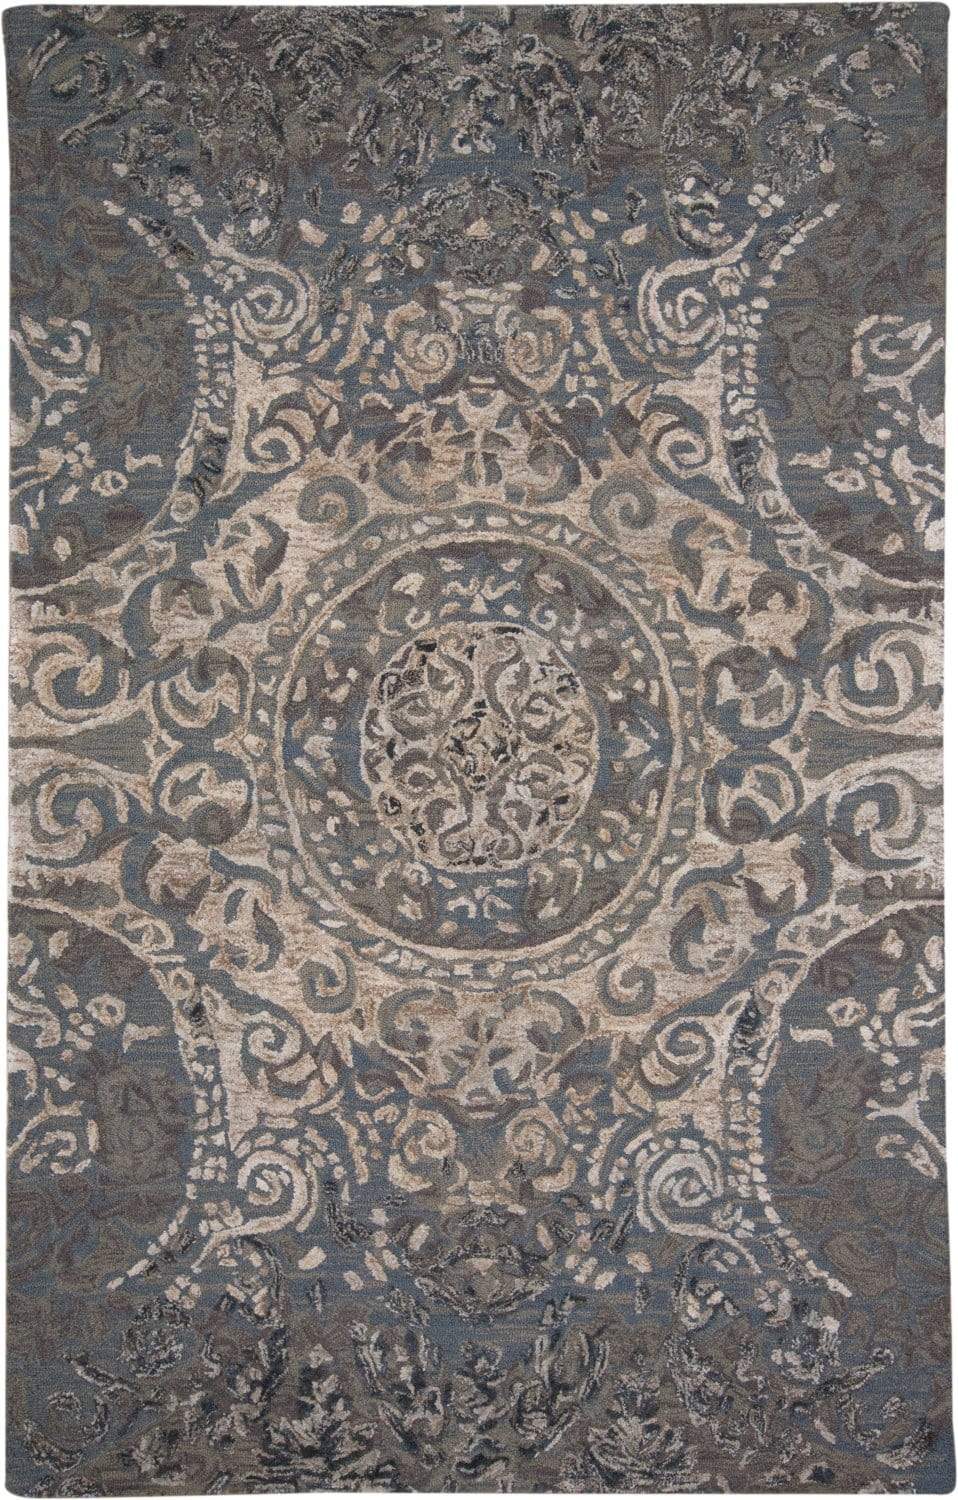 Feizy Feizy Tivoli Distressed Textured Wool Rug - Available in 5 Sizes - Blue Smoke & Taupe Gray 5' x 8' 6518214FTWL000E10